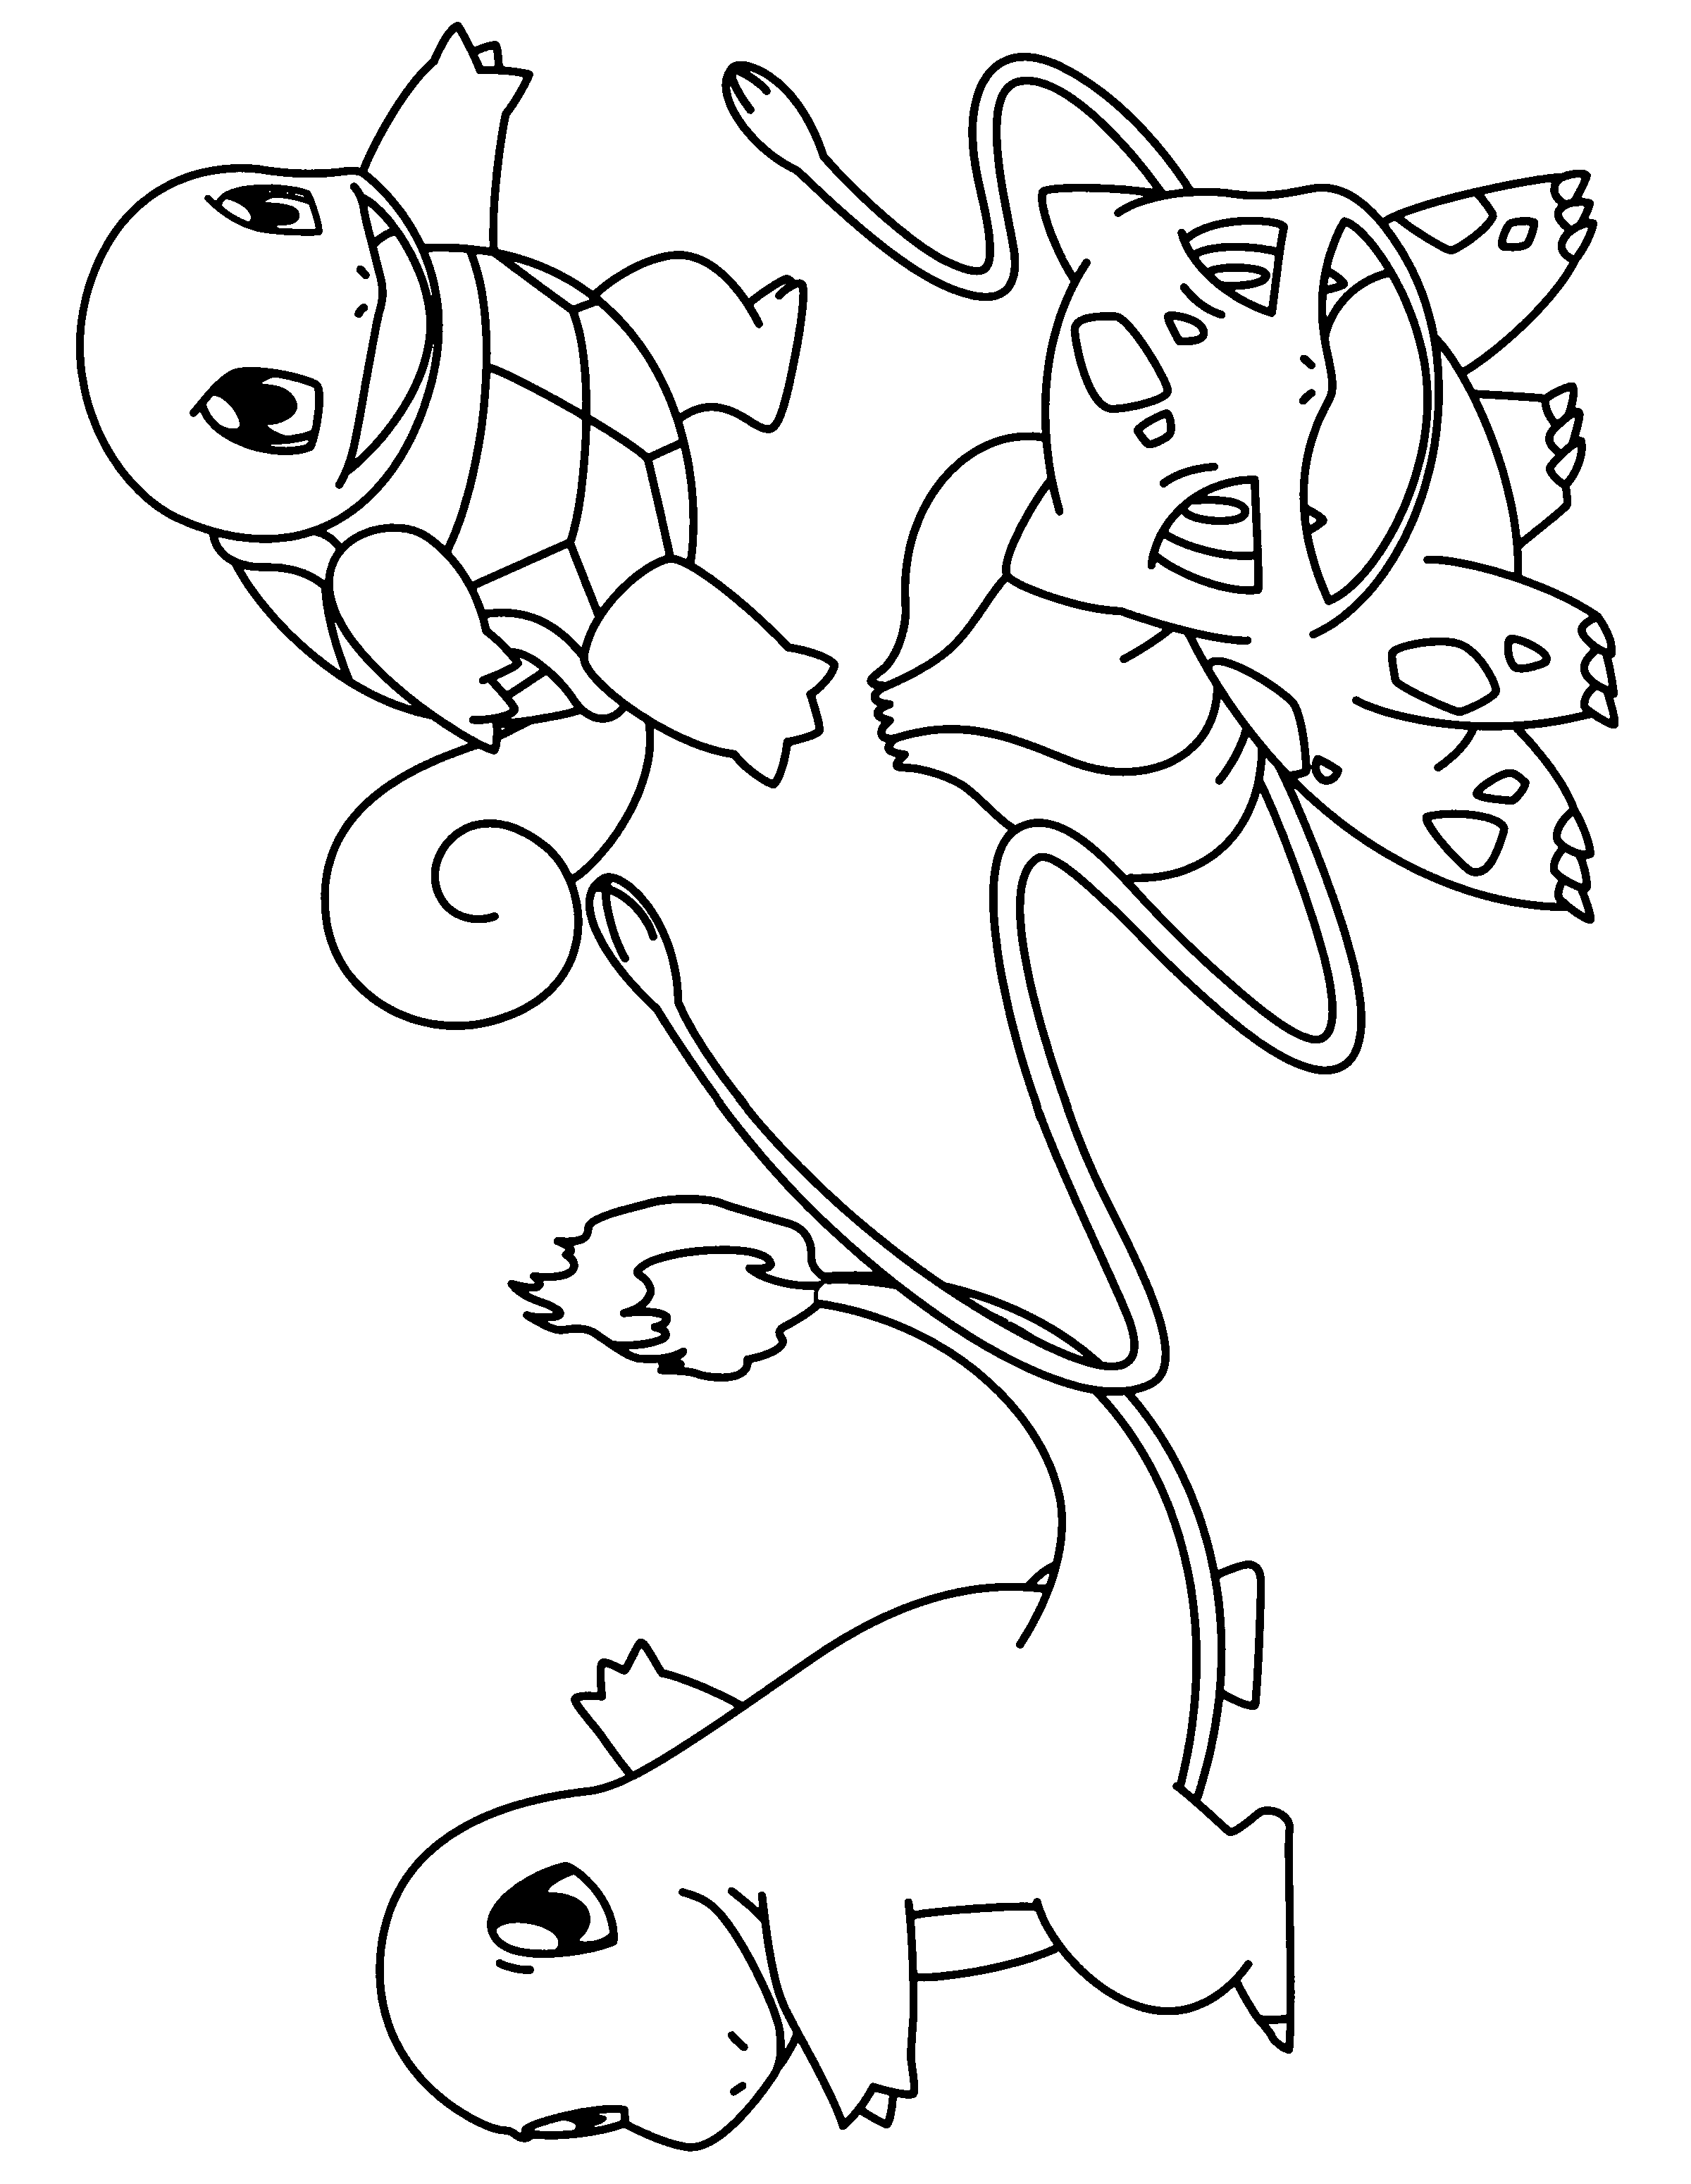 Free Pokemon Charmander Coloring Pages Download Free Pokemon Charmander Coloring Pages Png Images Free Cliparts On Clipart Library